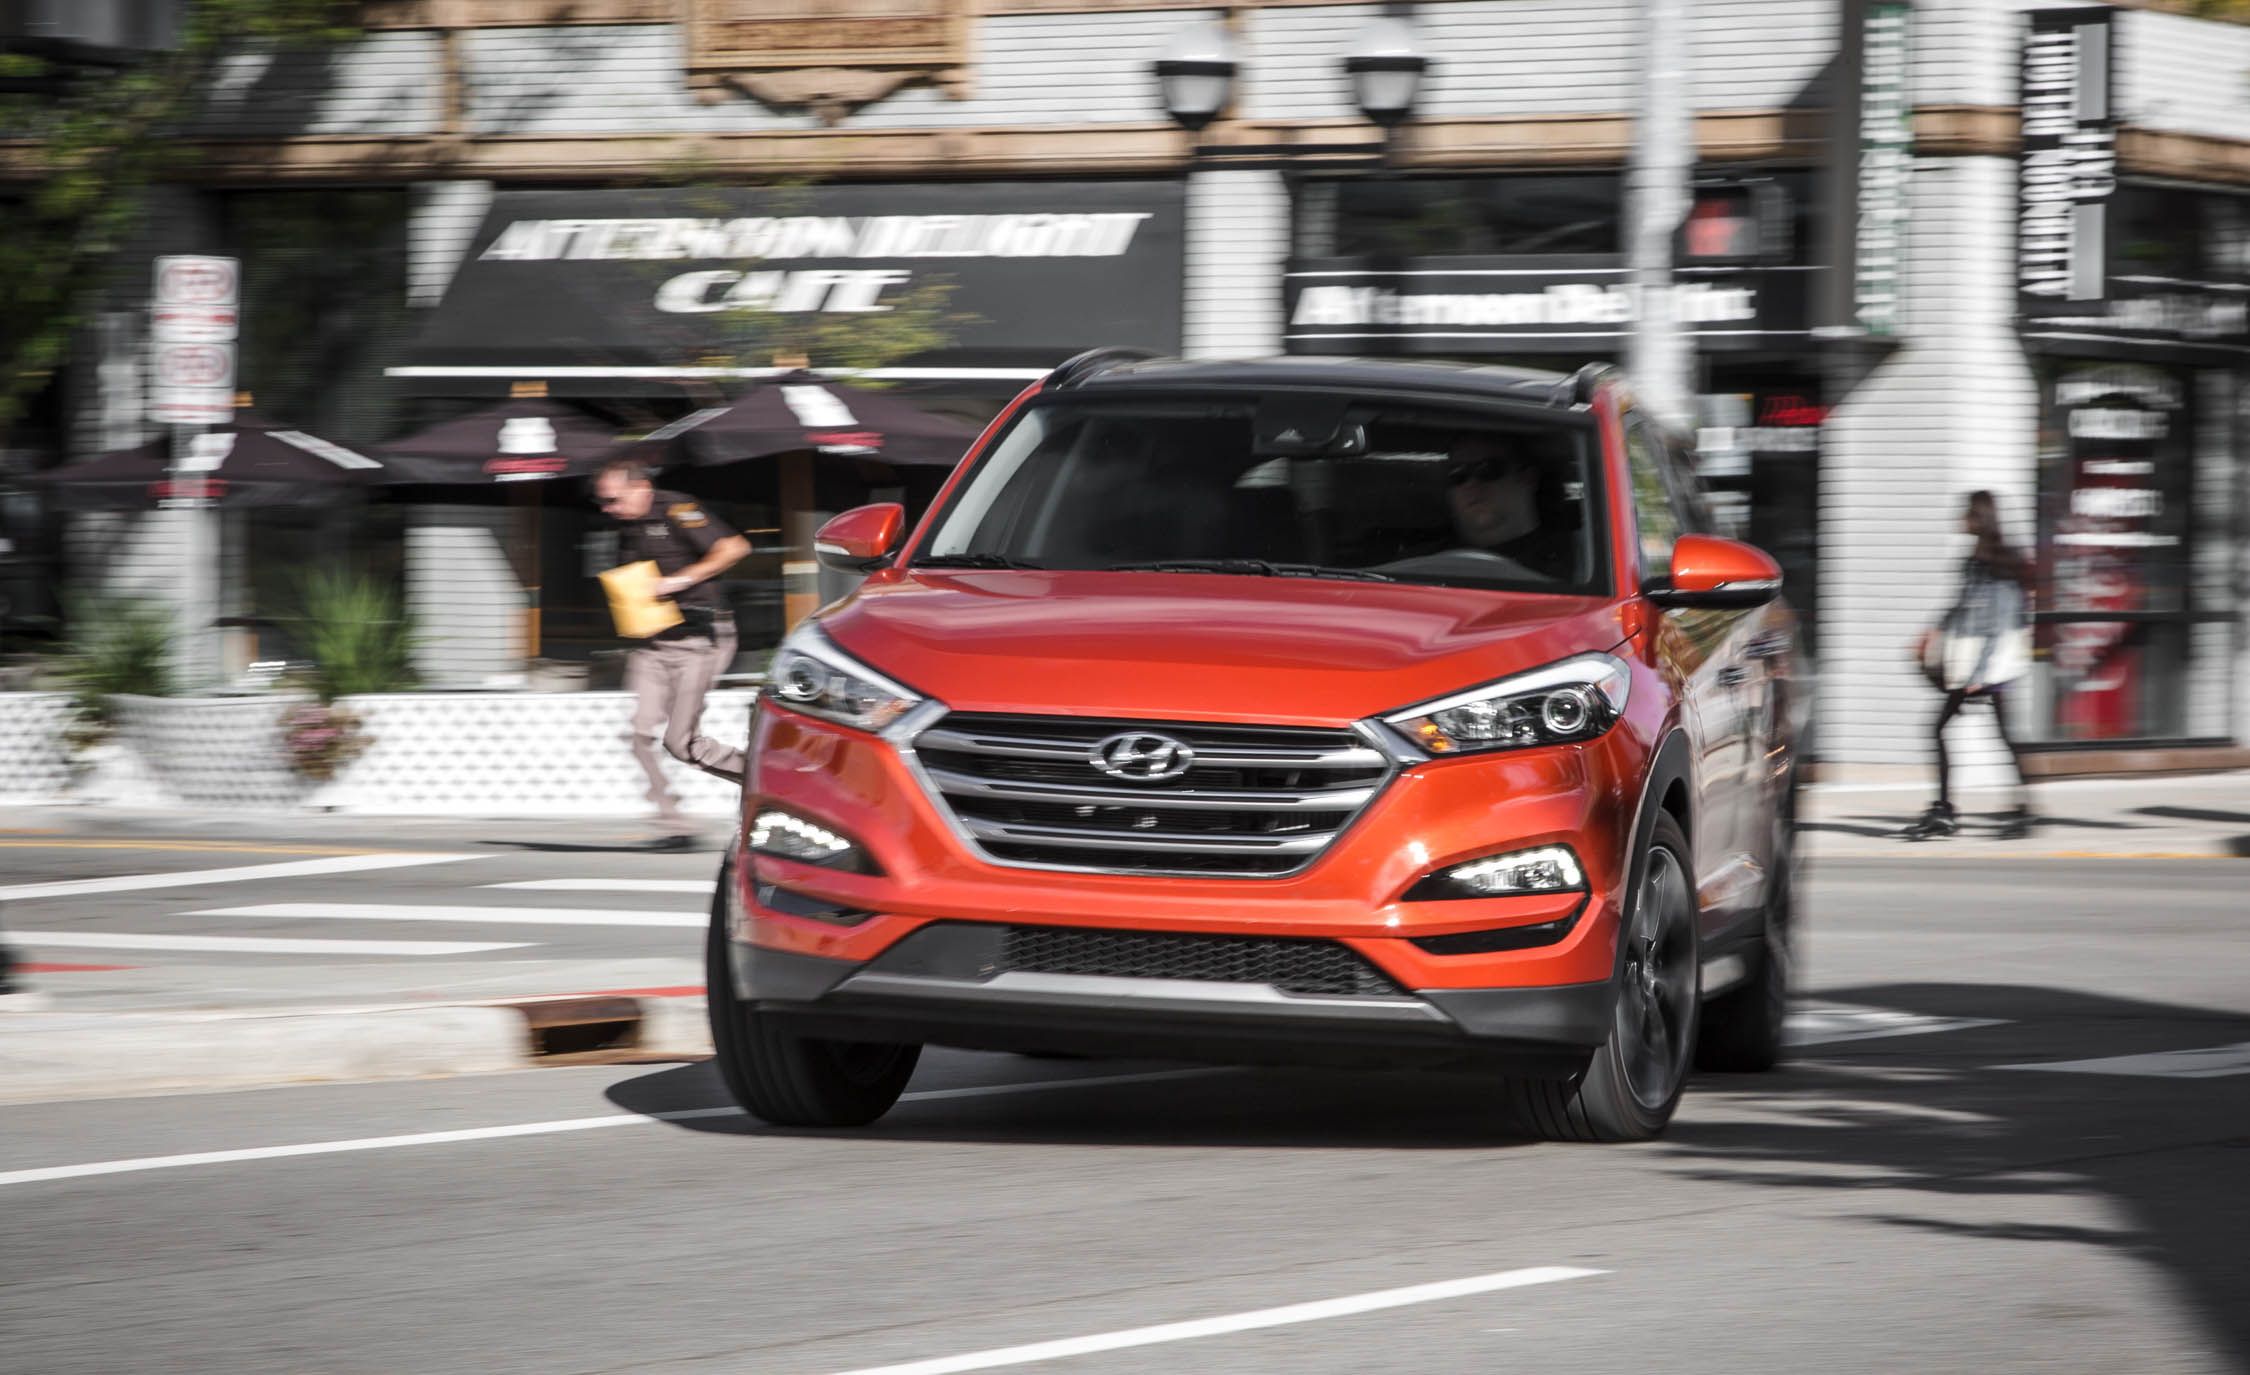 Design changes move 2016 Hyundai Tucson back in the pack